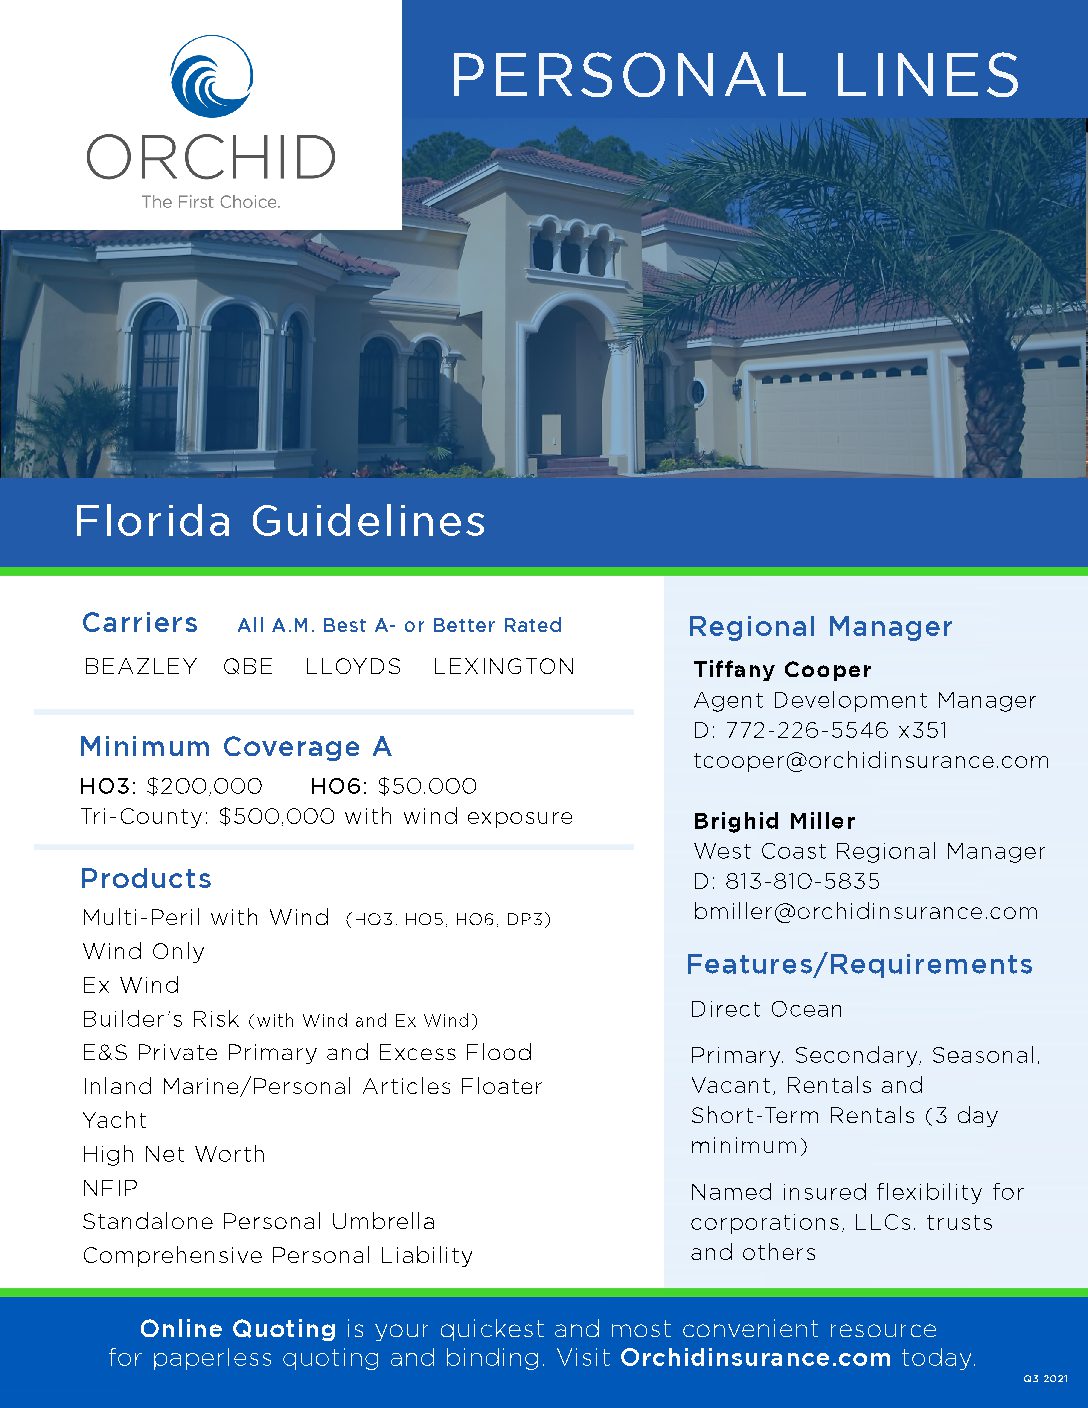 Florida Insurance Personal Lines Guidelines